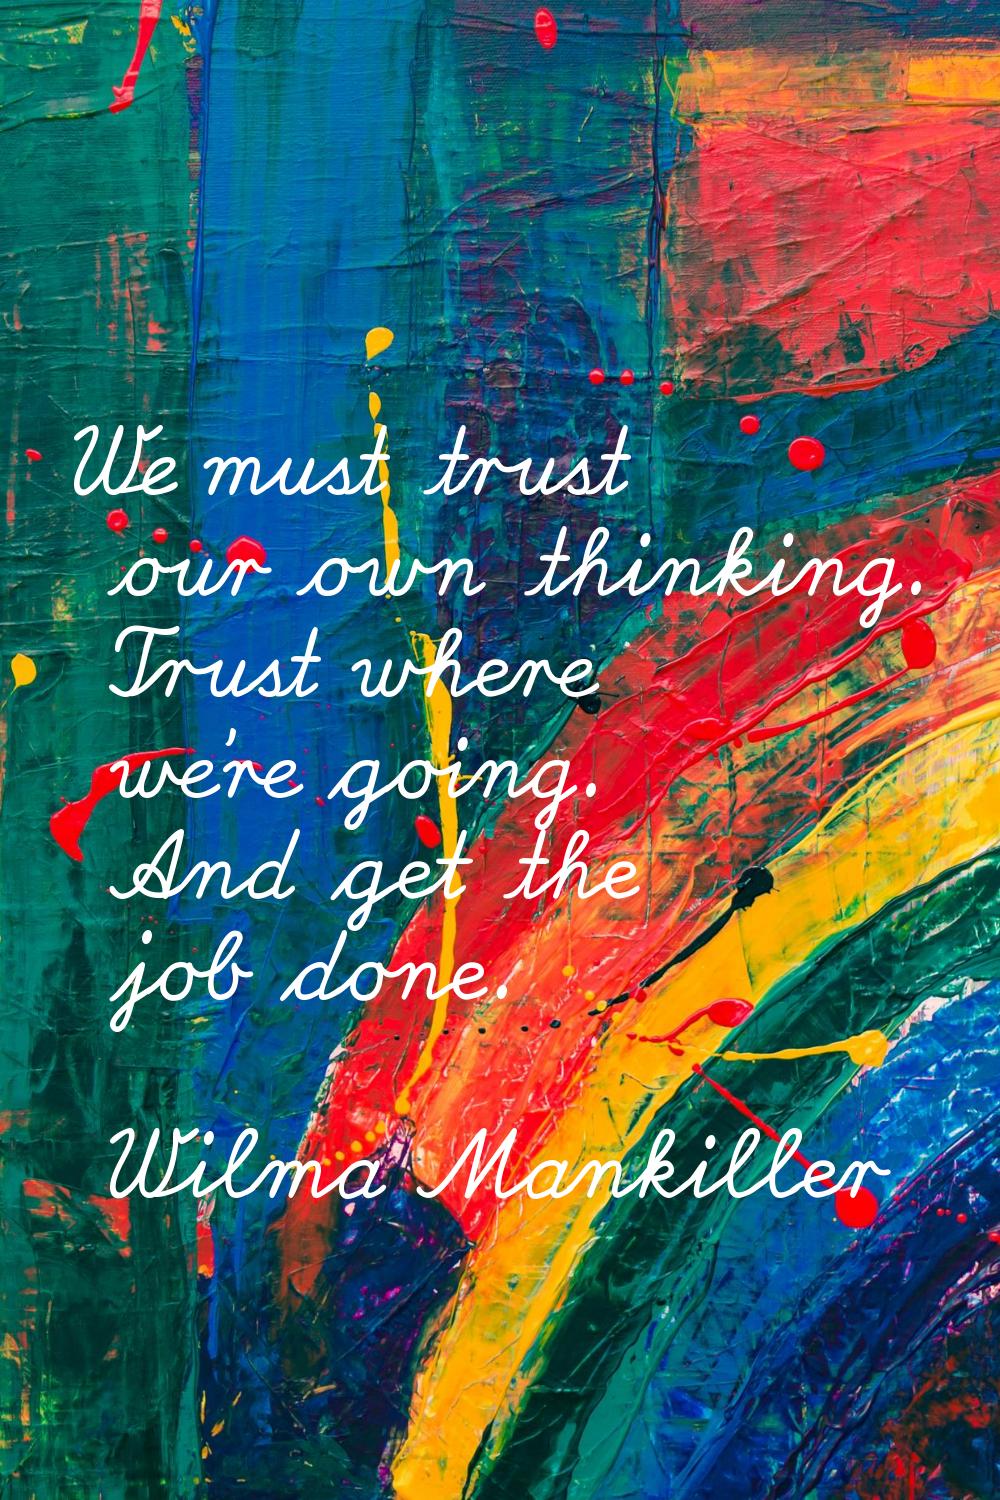 We must trust our own thinking. Trust where we're going. And get the job done.